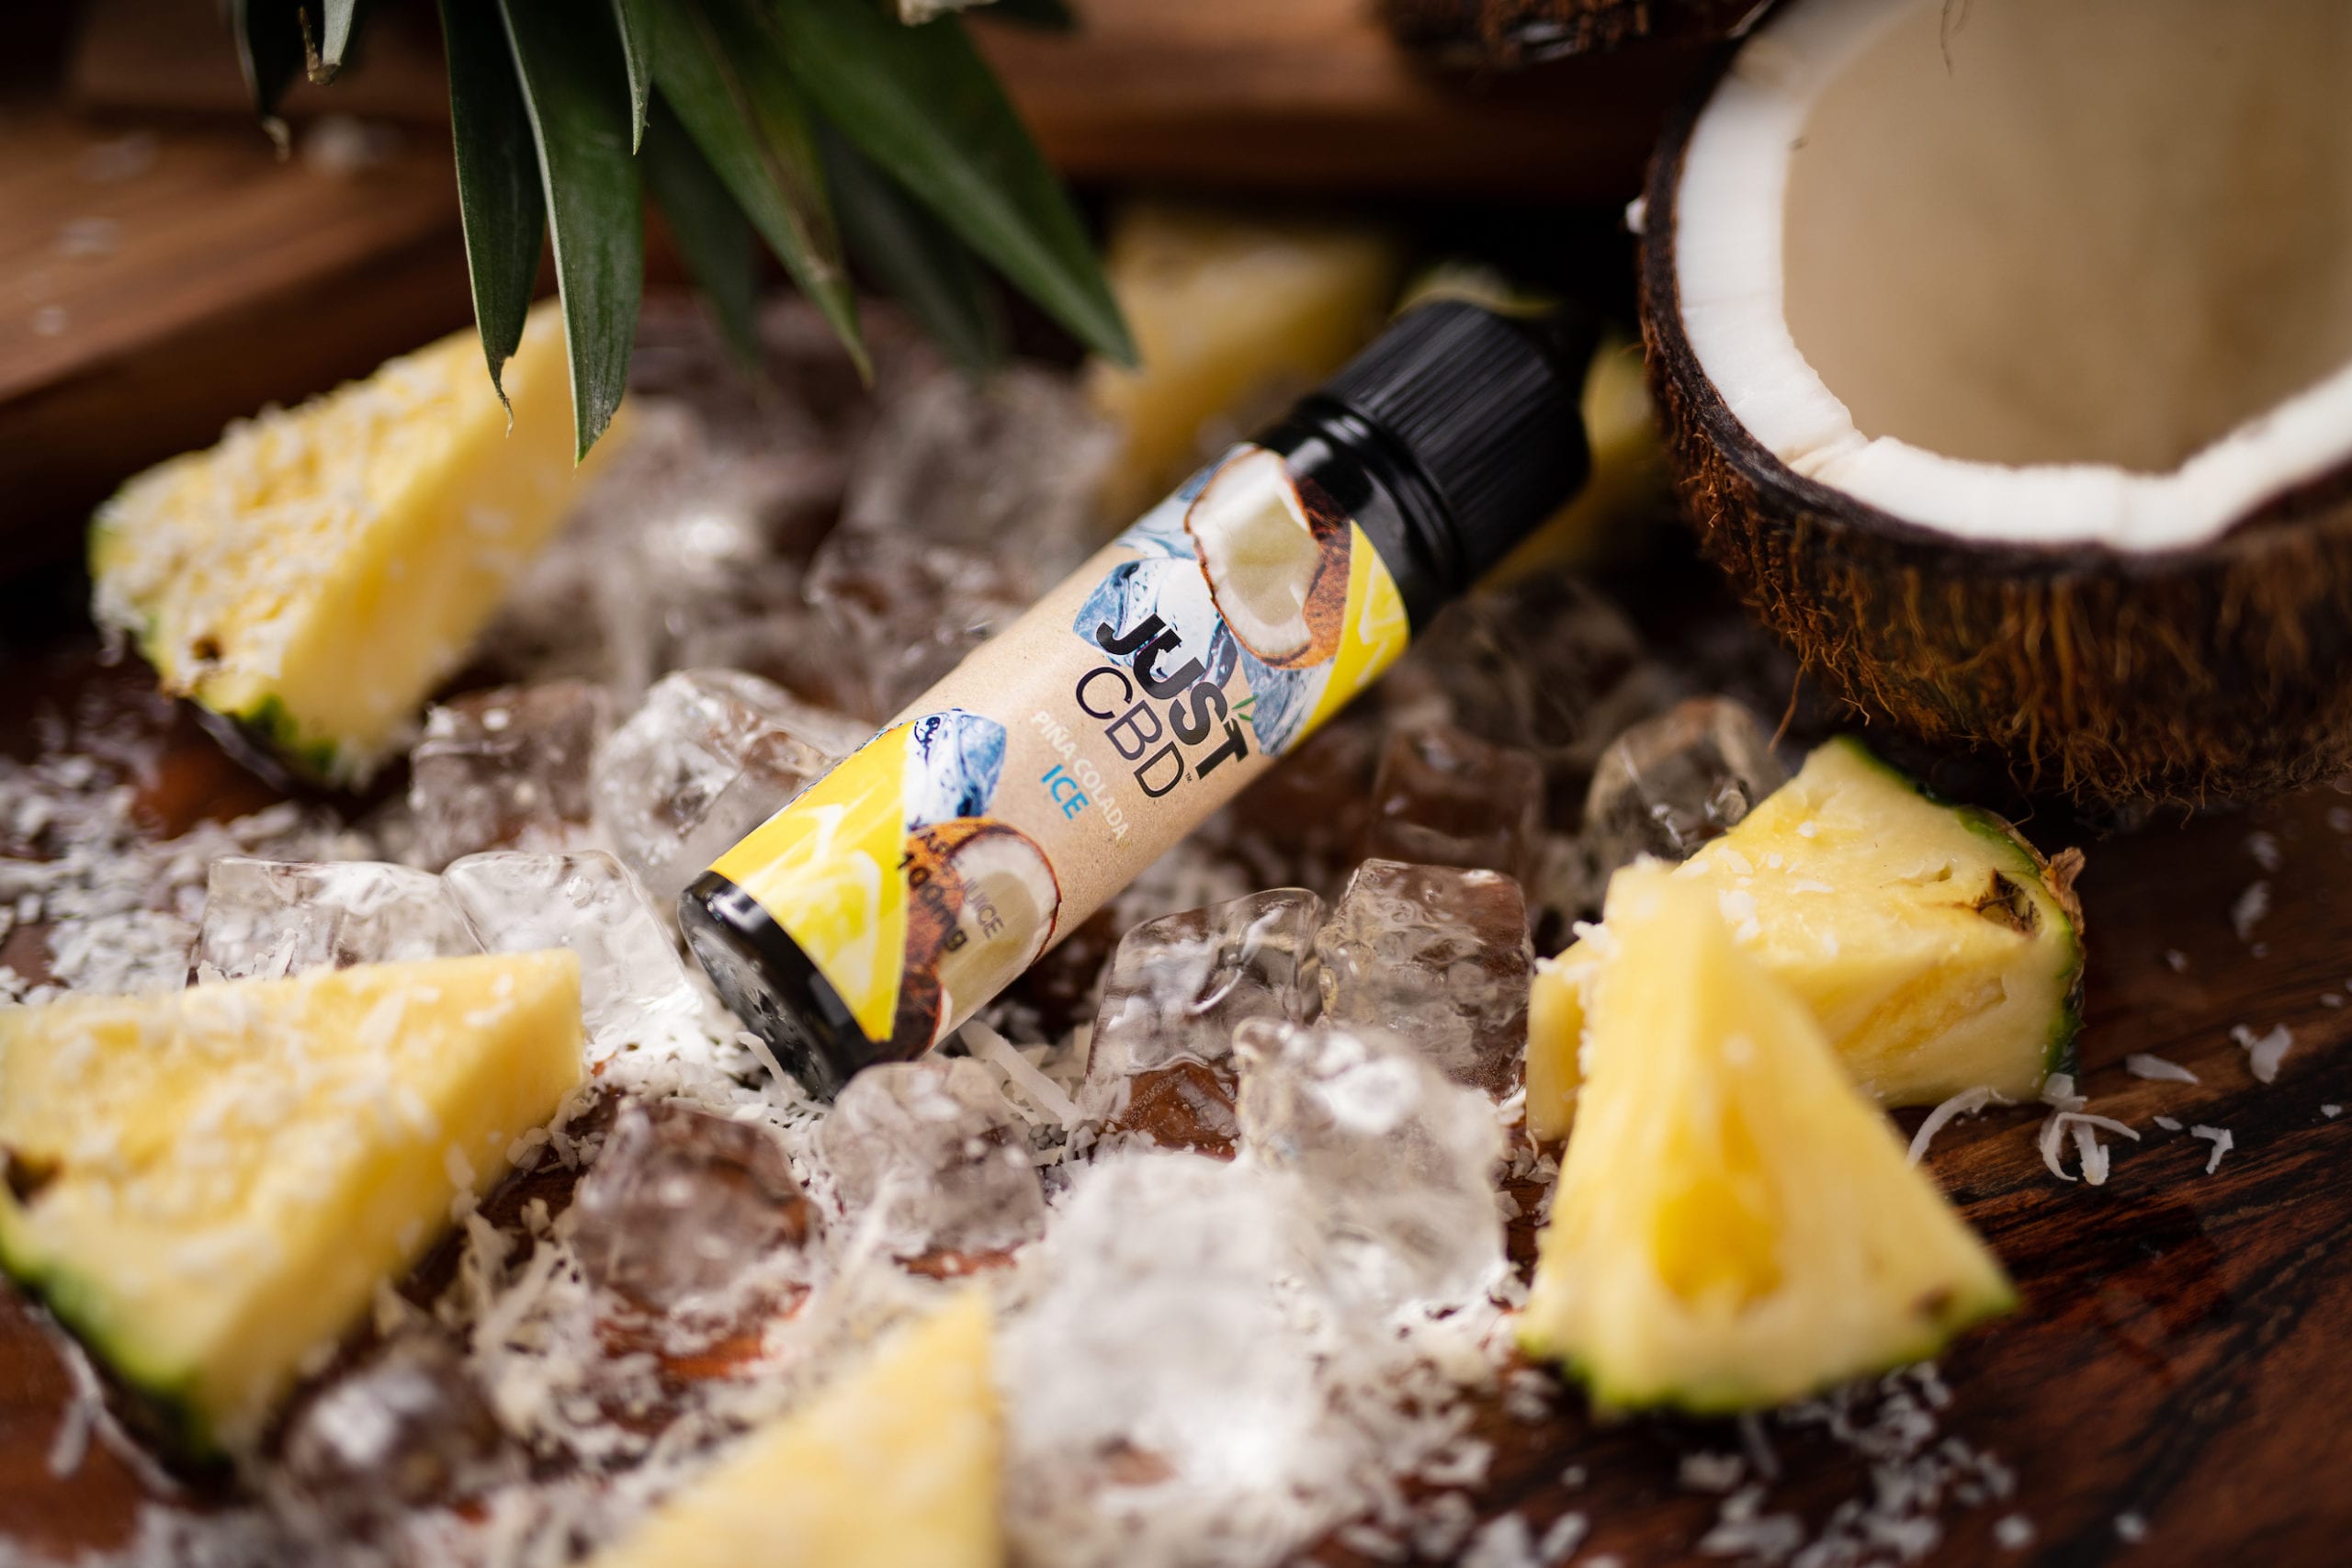 IU C&I Studios Portfolio and Page JustCBD Product Photography and Just CBD Products Pina Colada ICE vape juice container on display surrounded with chunks of pineapple and coconut